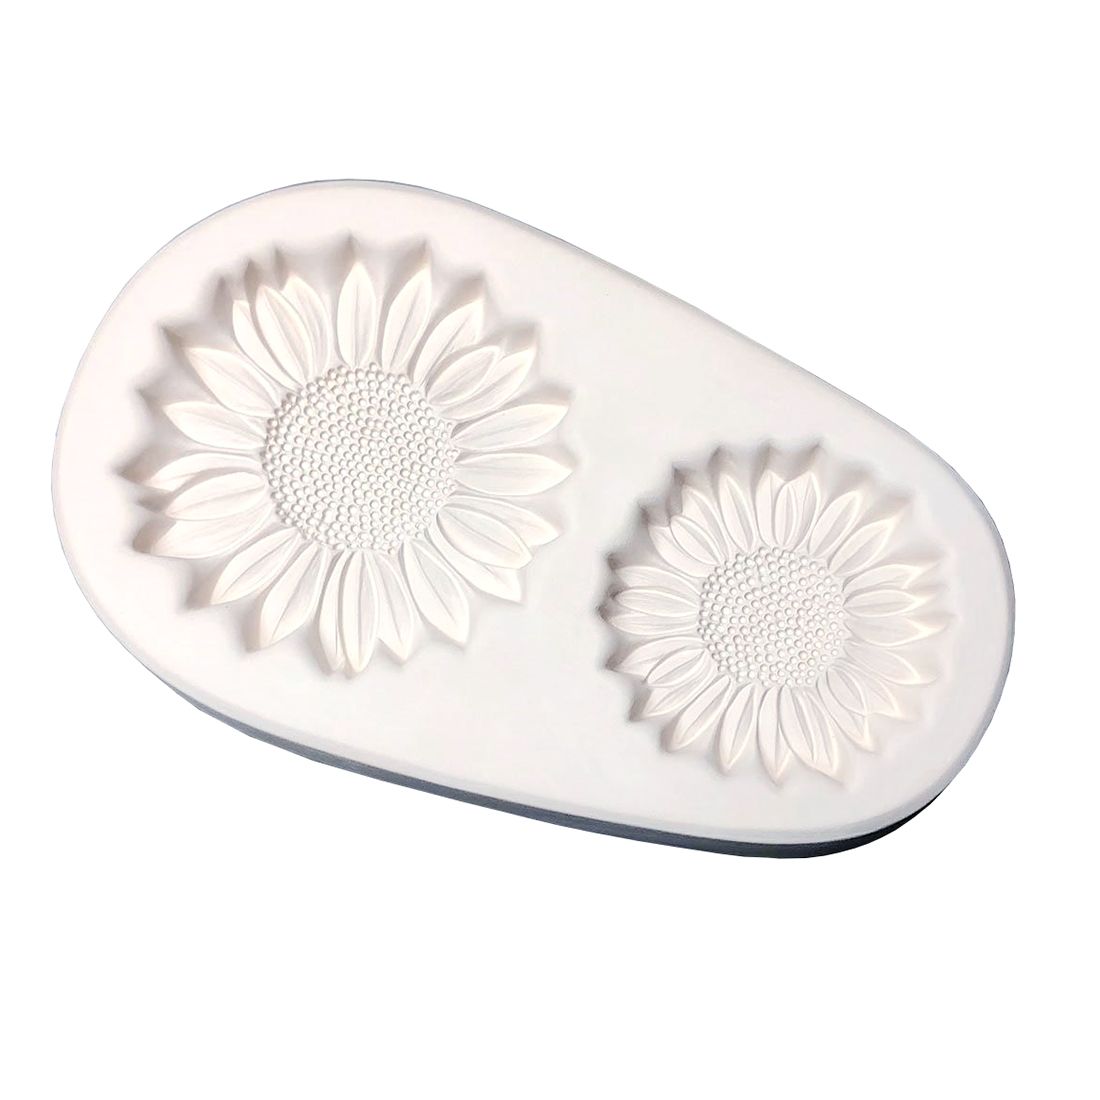 SUNFLOWER - 2 SMALL CASTING MOLD - by CPI